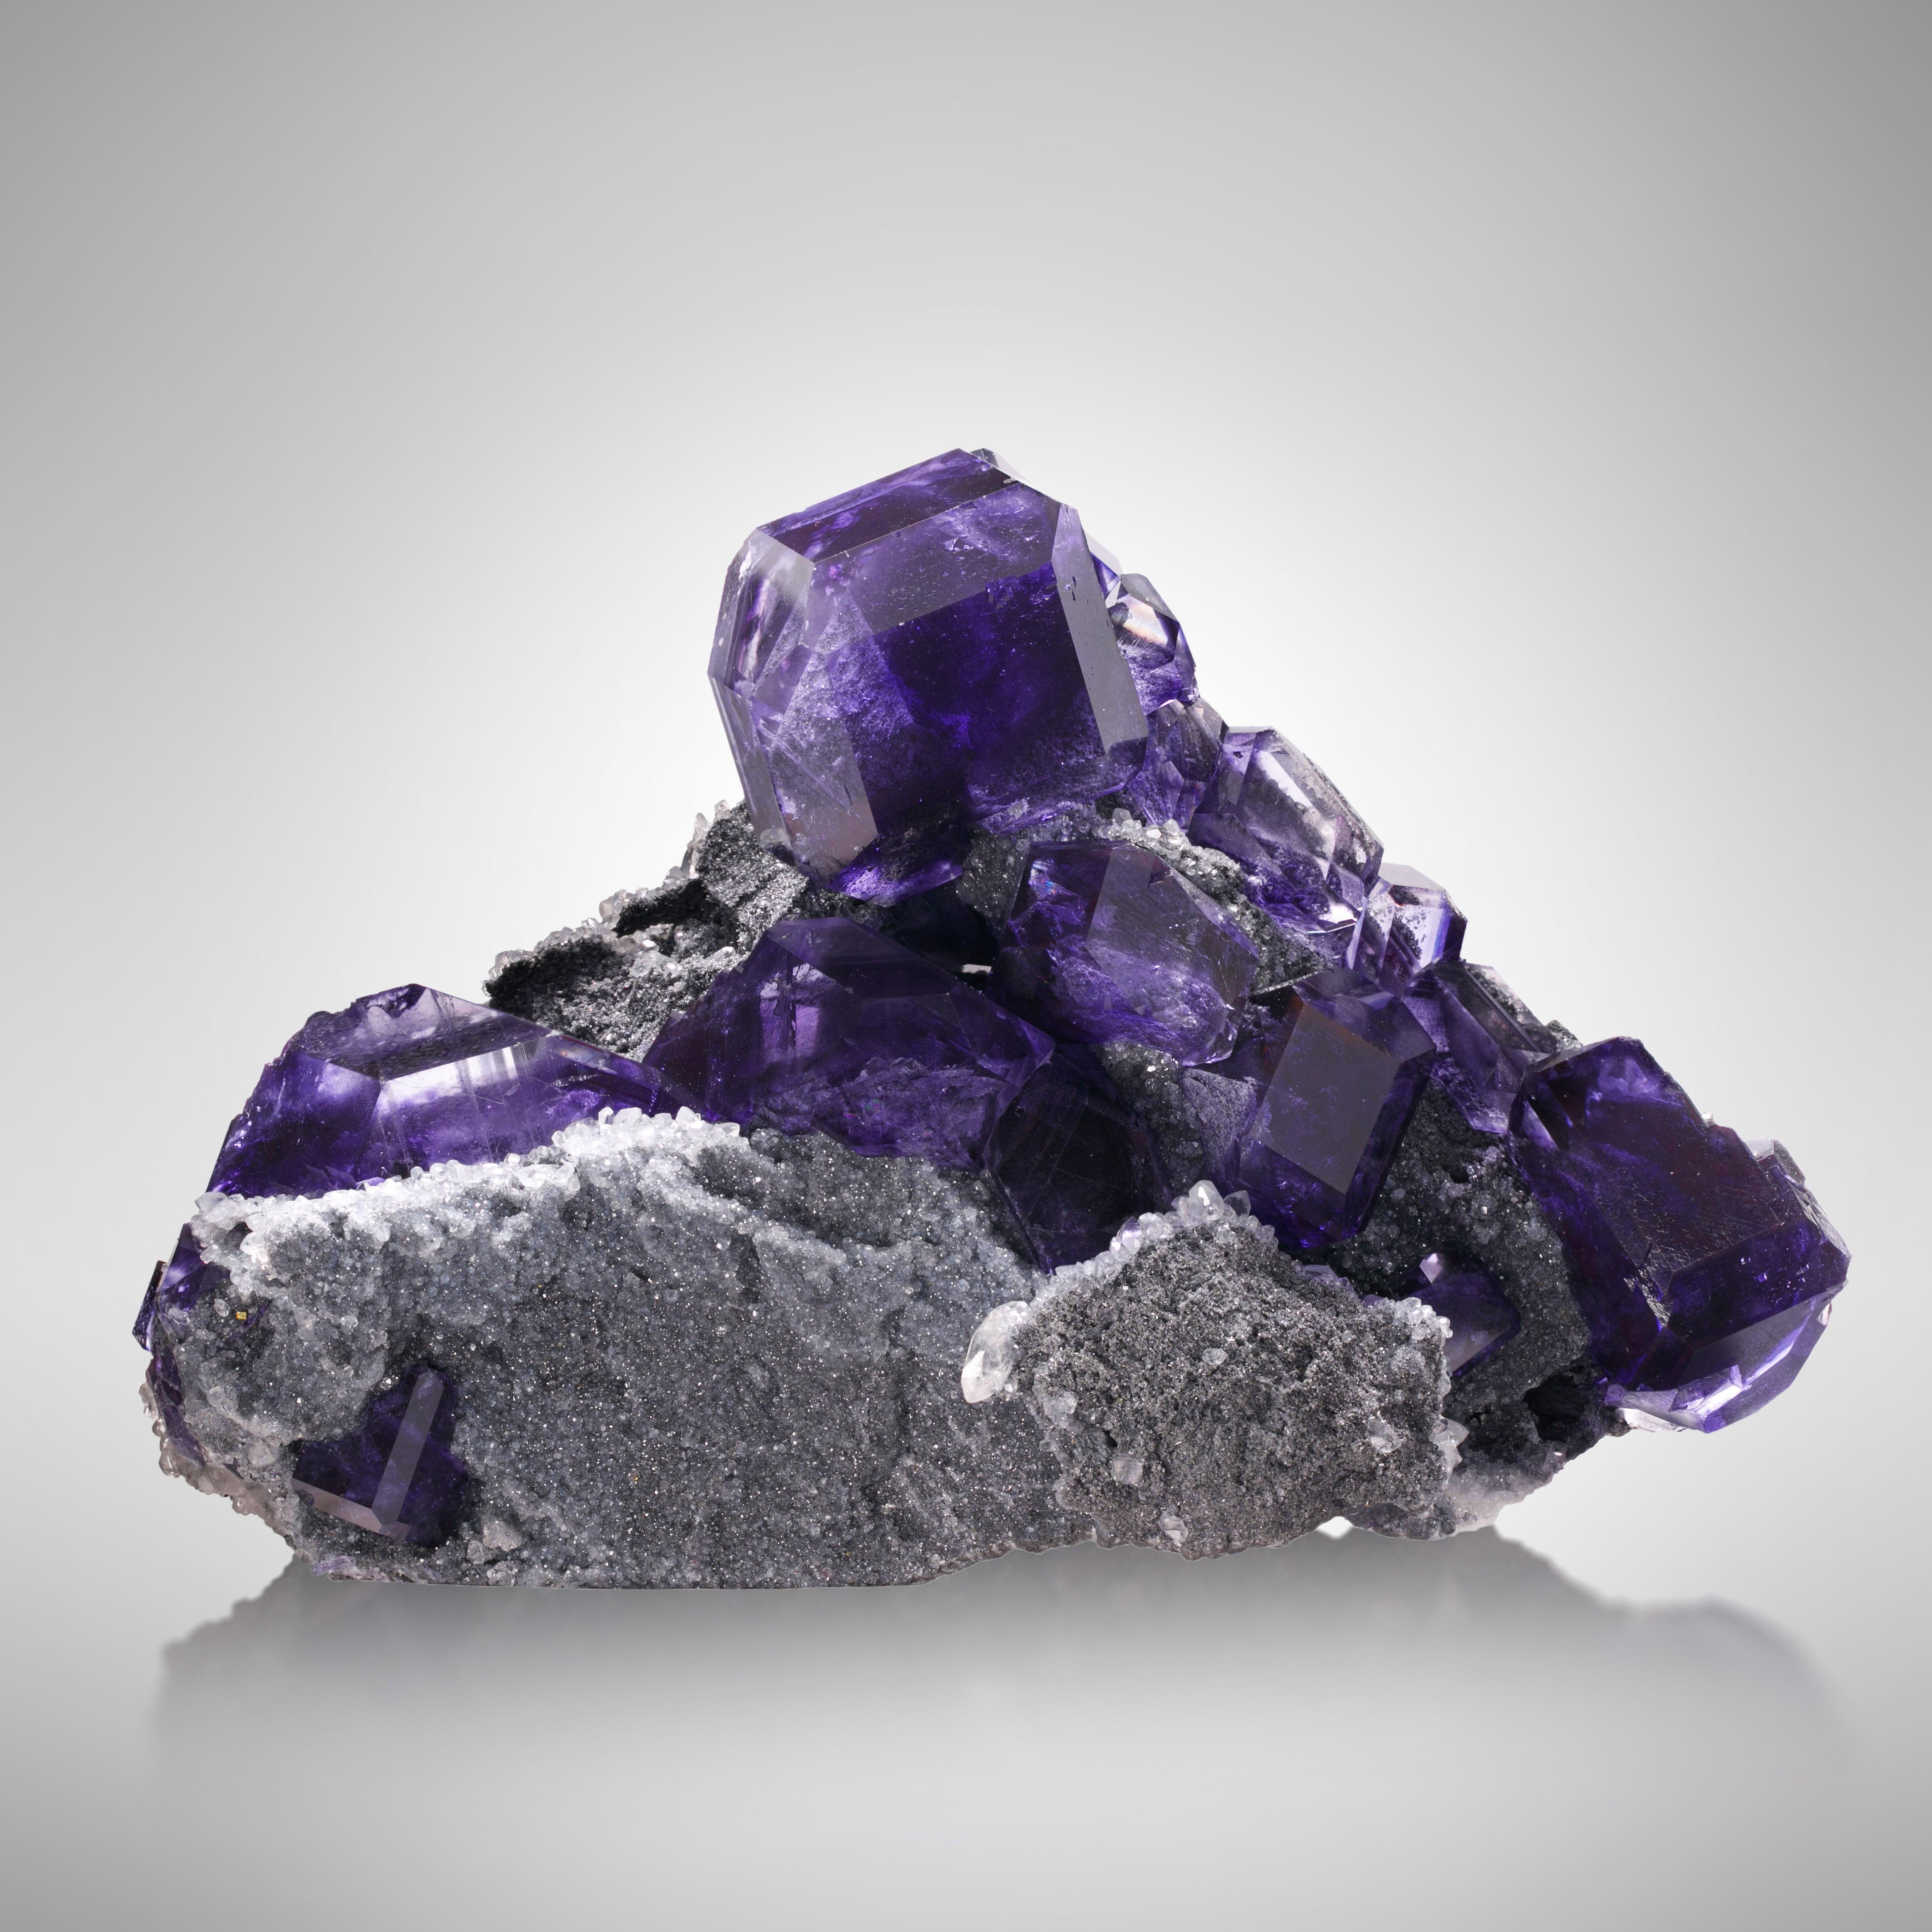 This breathtaking specimen comes from a distinctive group of fluorites that have affectionately been nicknamed, “tanzanite fluorite” for their gemlike aesthetics and color-shifting ability. Tanzanite fluorites appear blue in cool light and purple